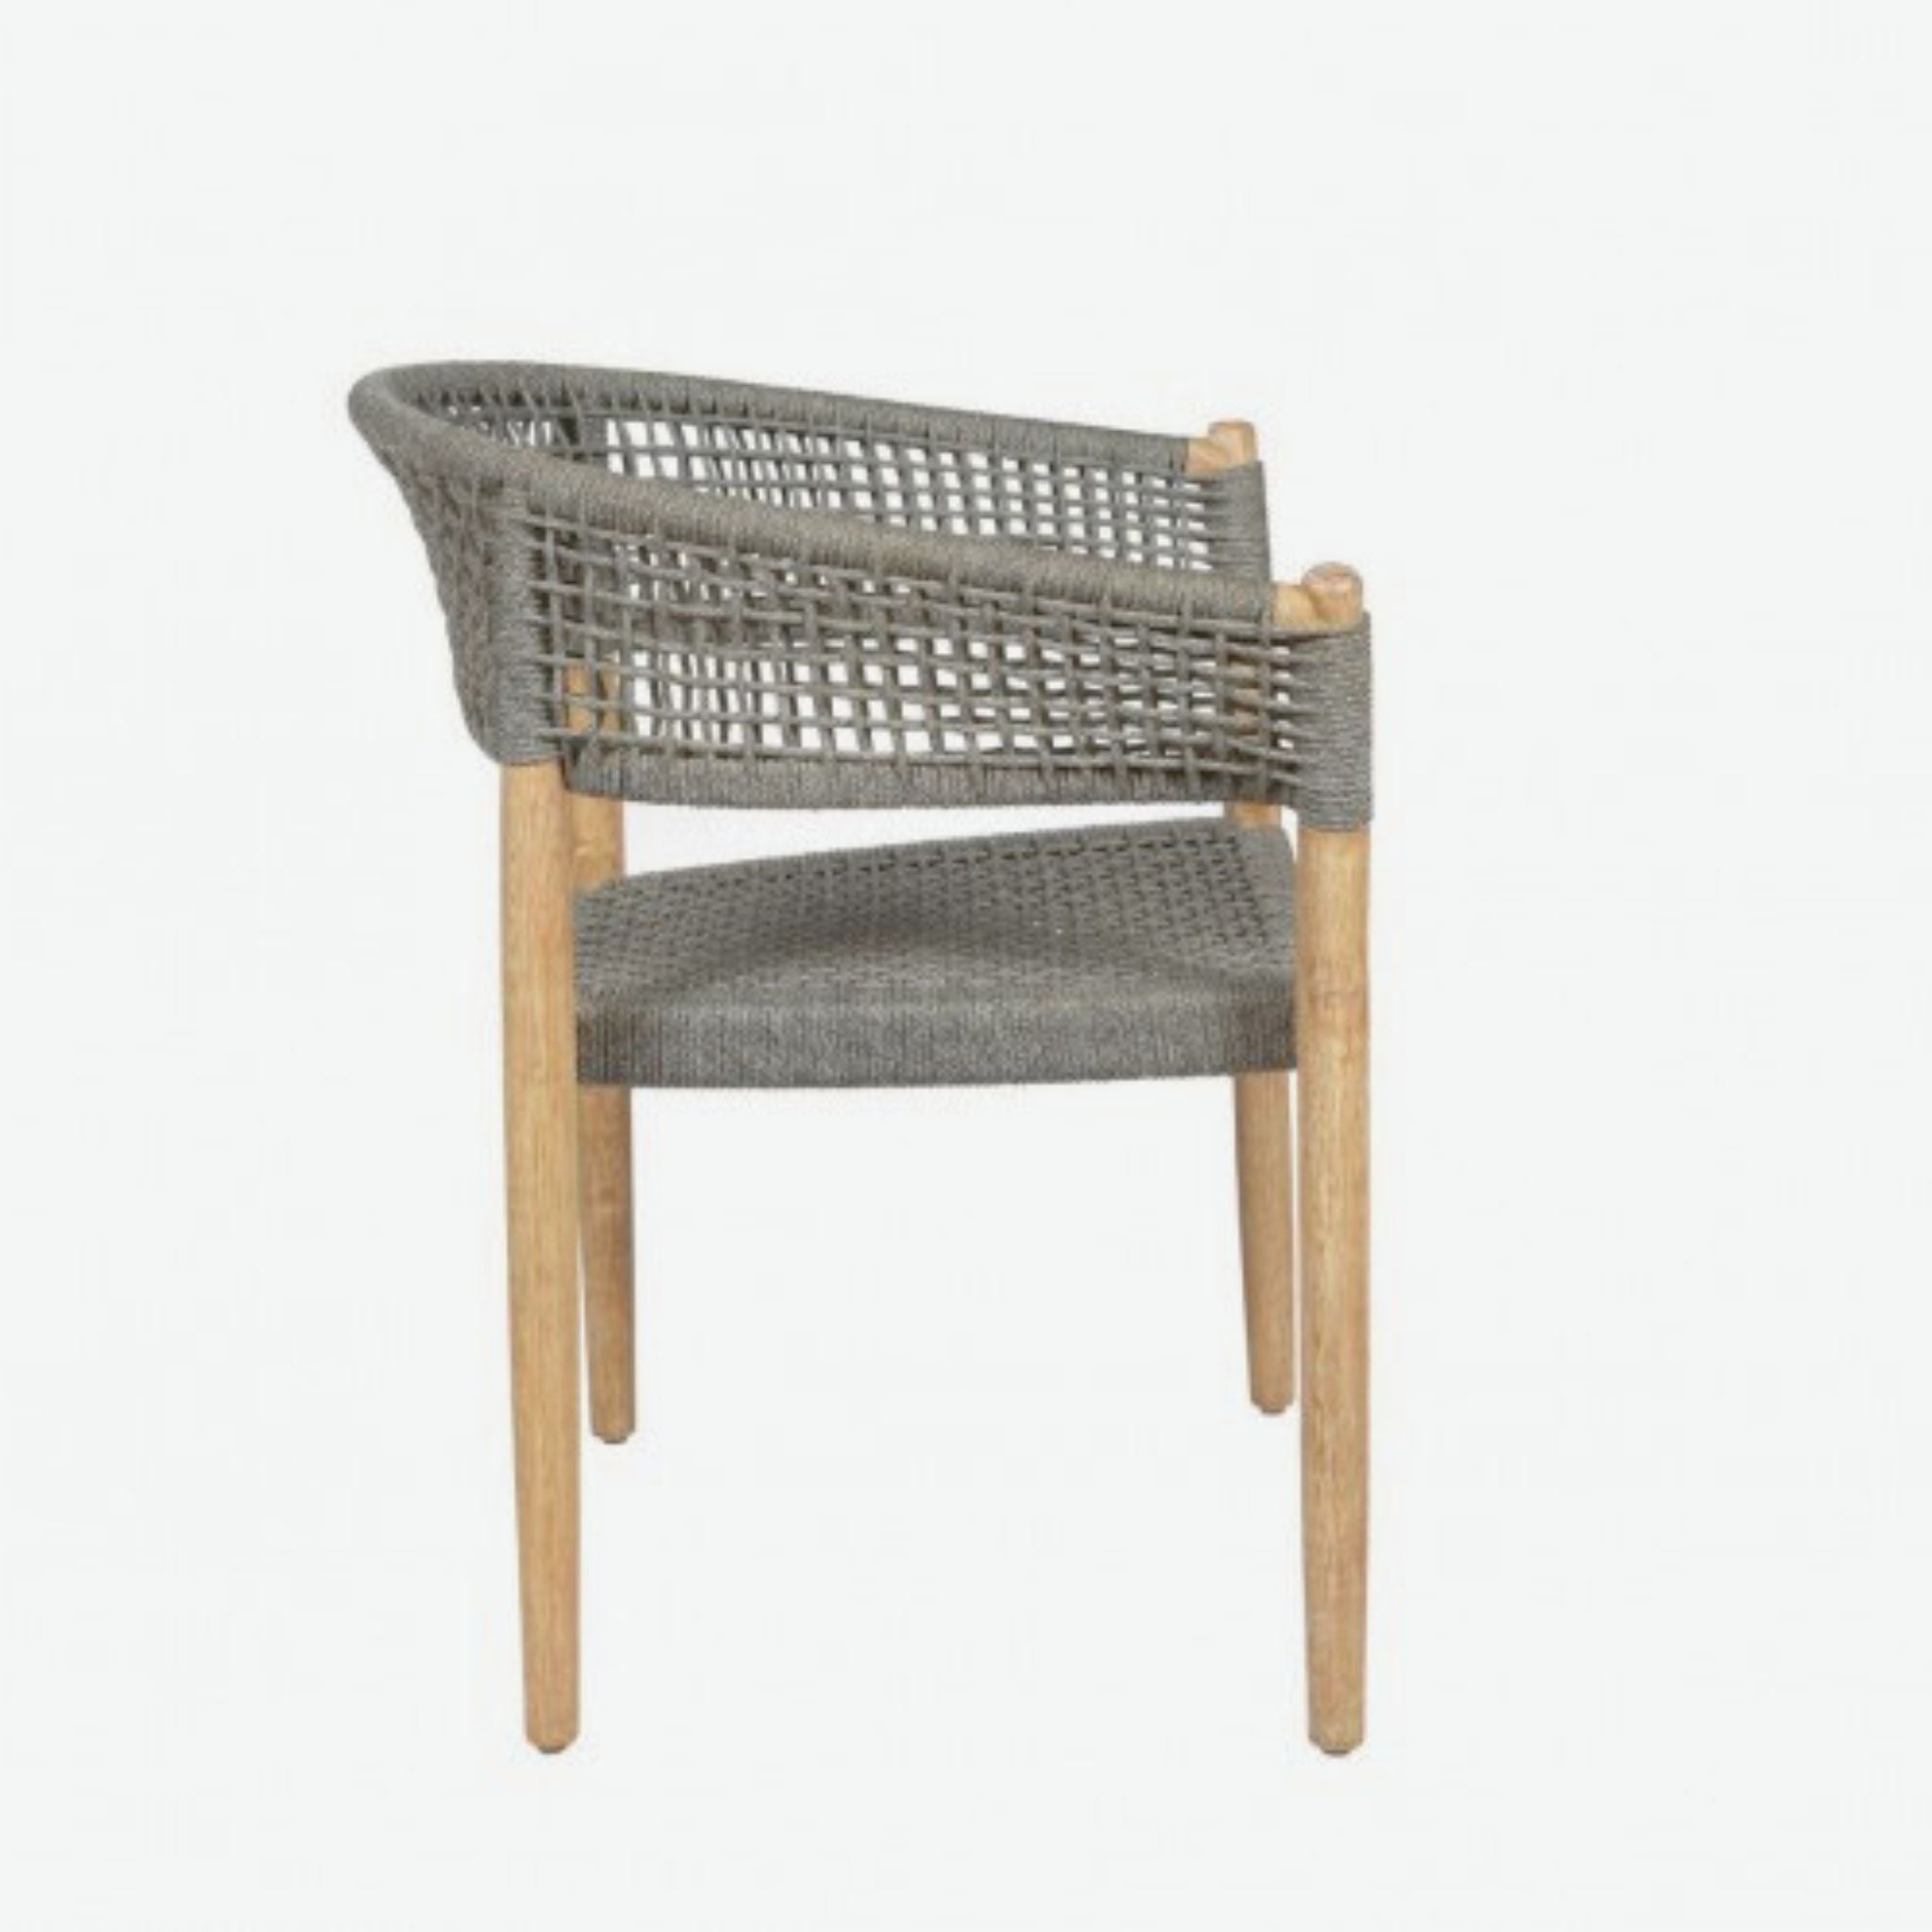 Crisal Decoracion Ibiza-B Outdoor Dining Chair in Wood and Gray Rope with Rounded Backrest Set of 2 - ModernistaLiving